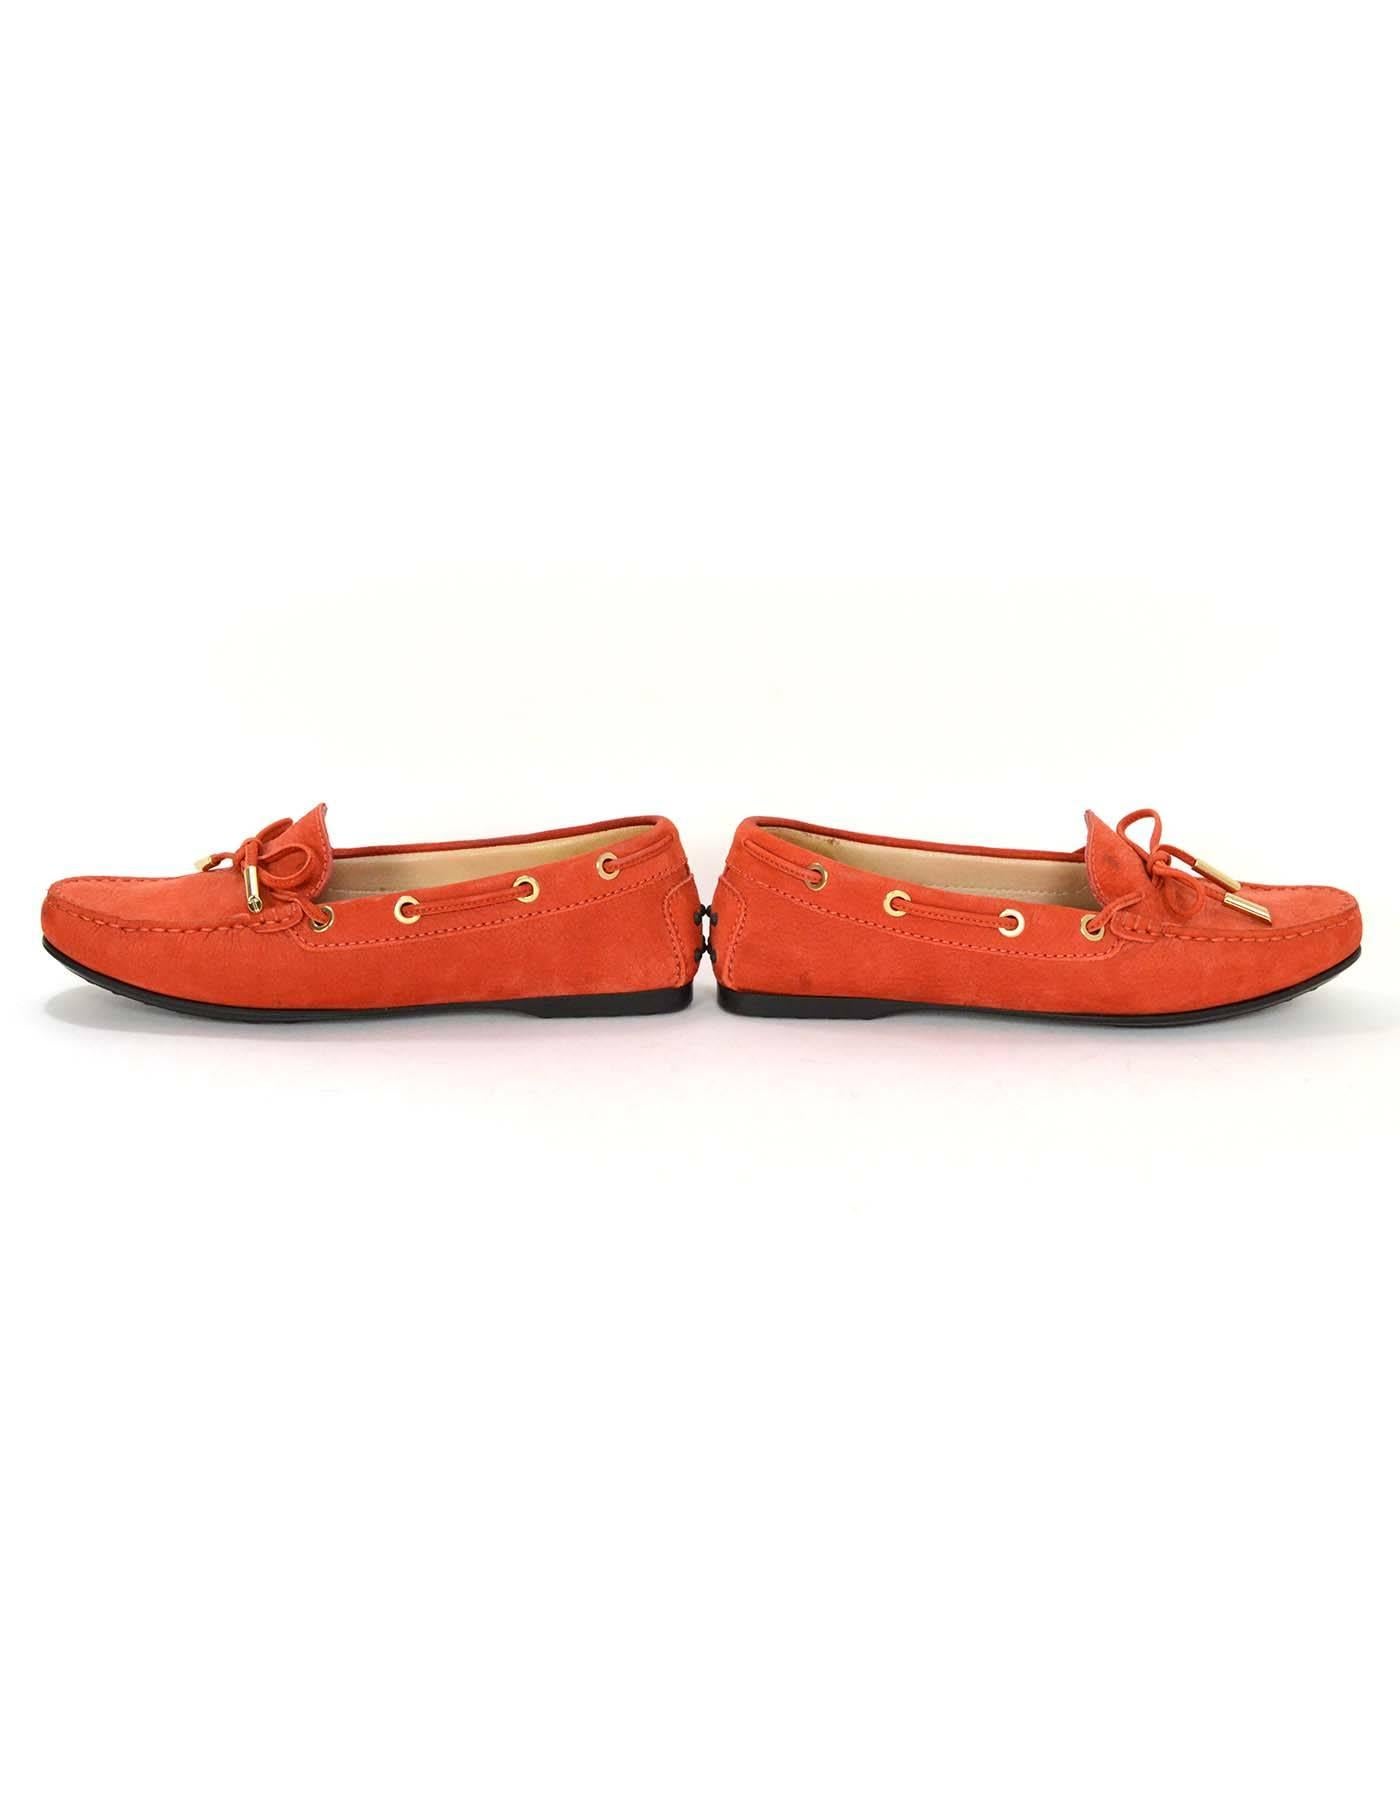 Tod's Orange Suede Riding Loafers Sz 36.5 2